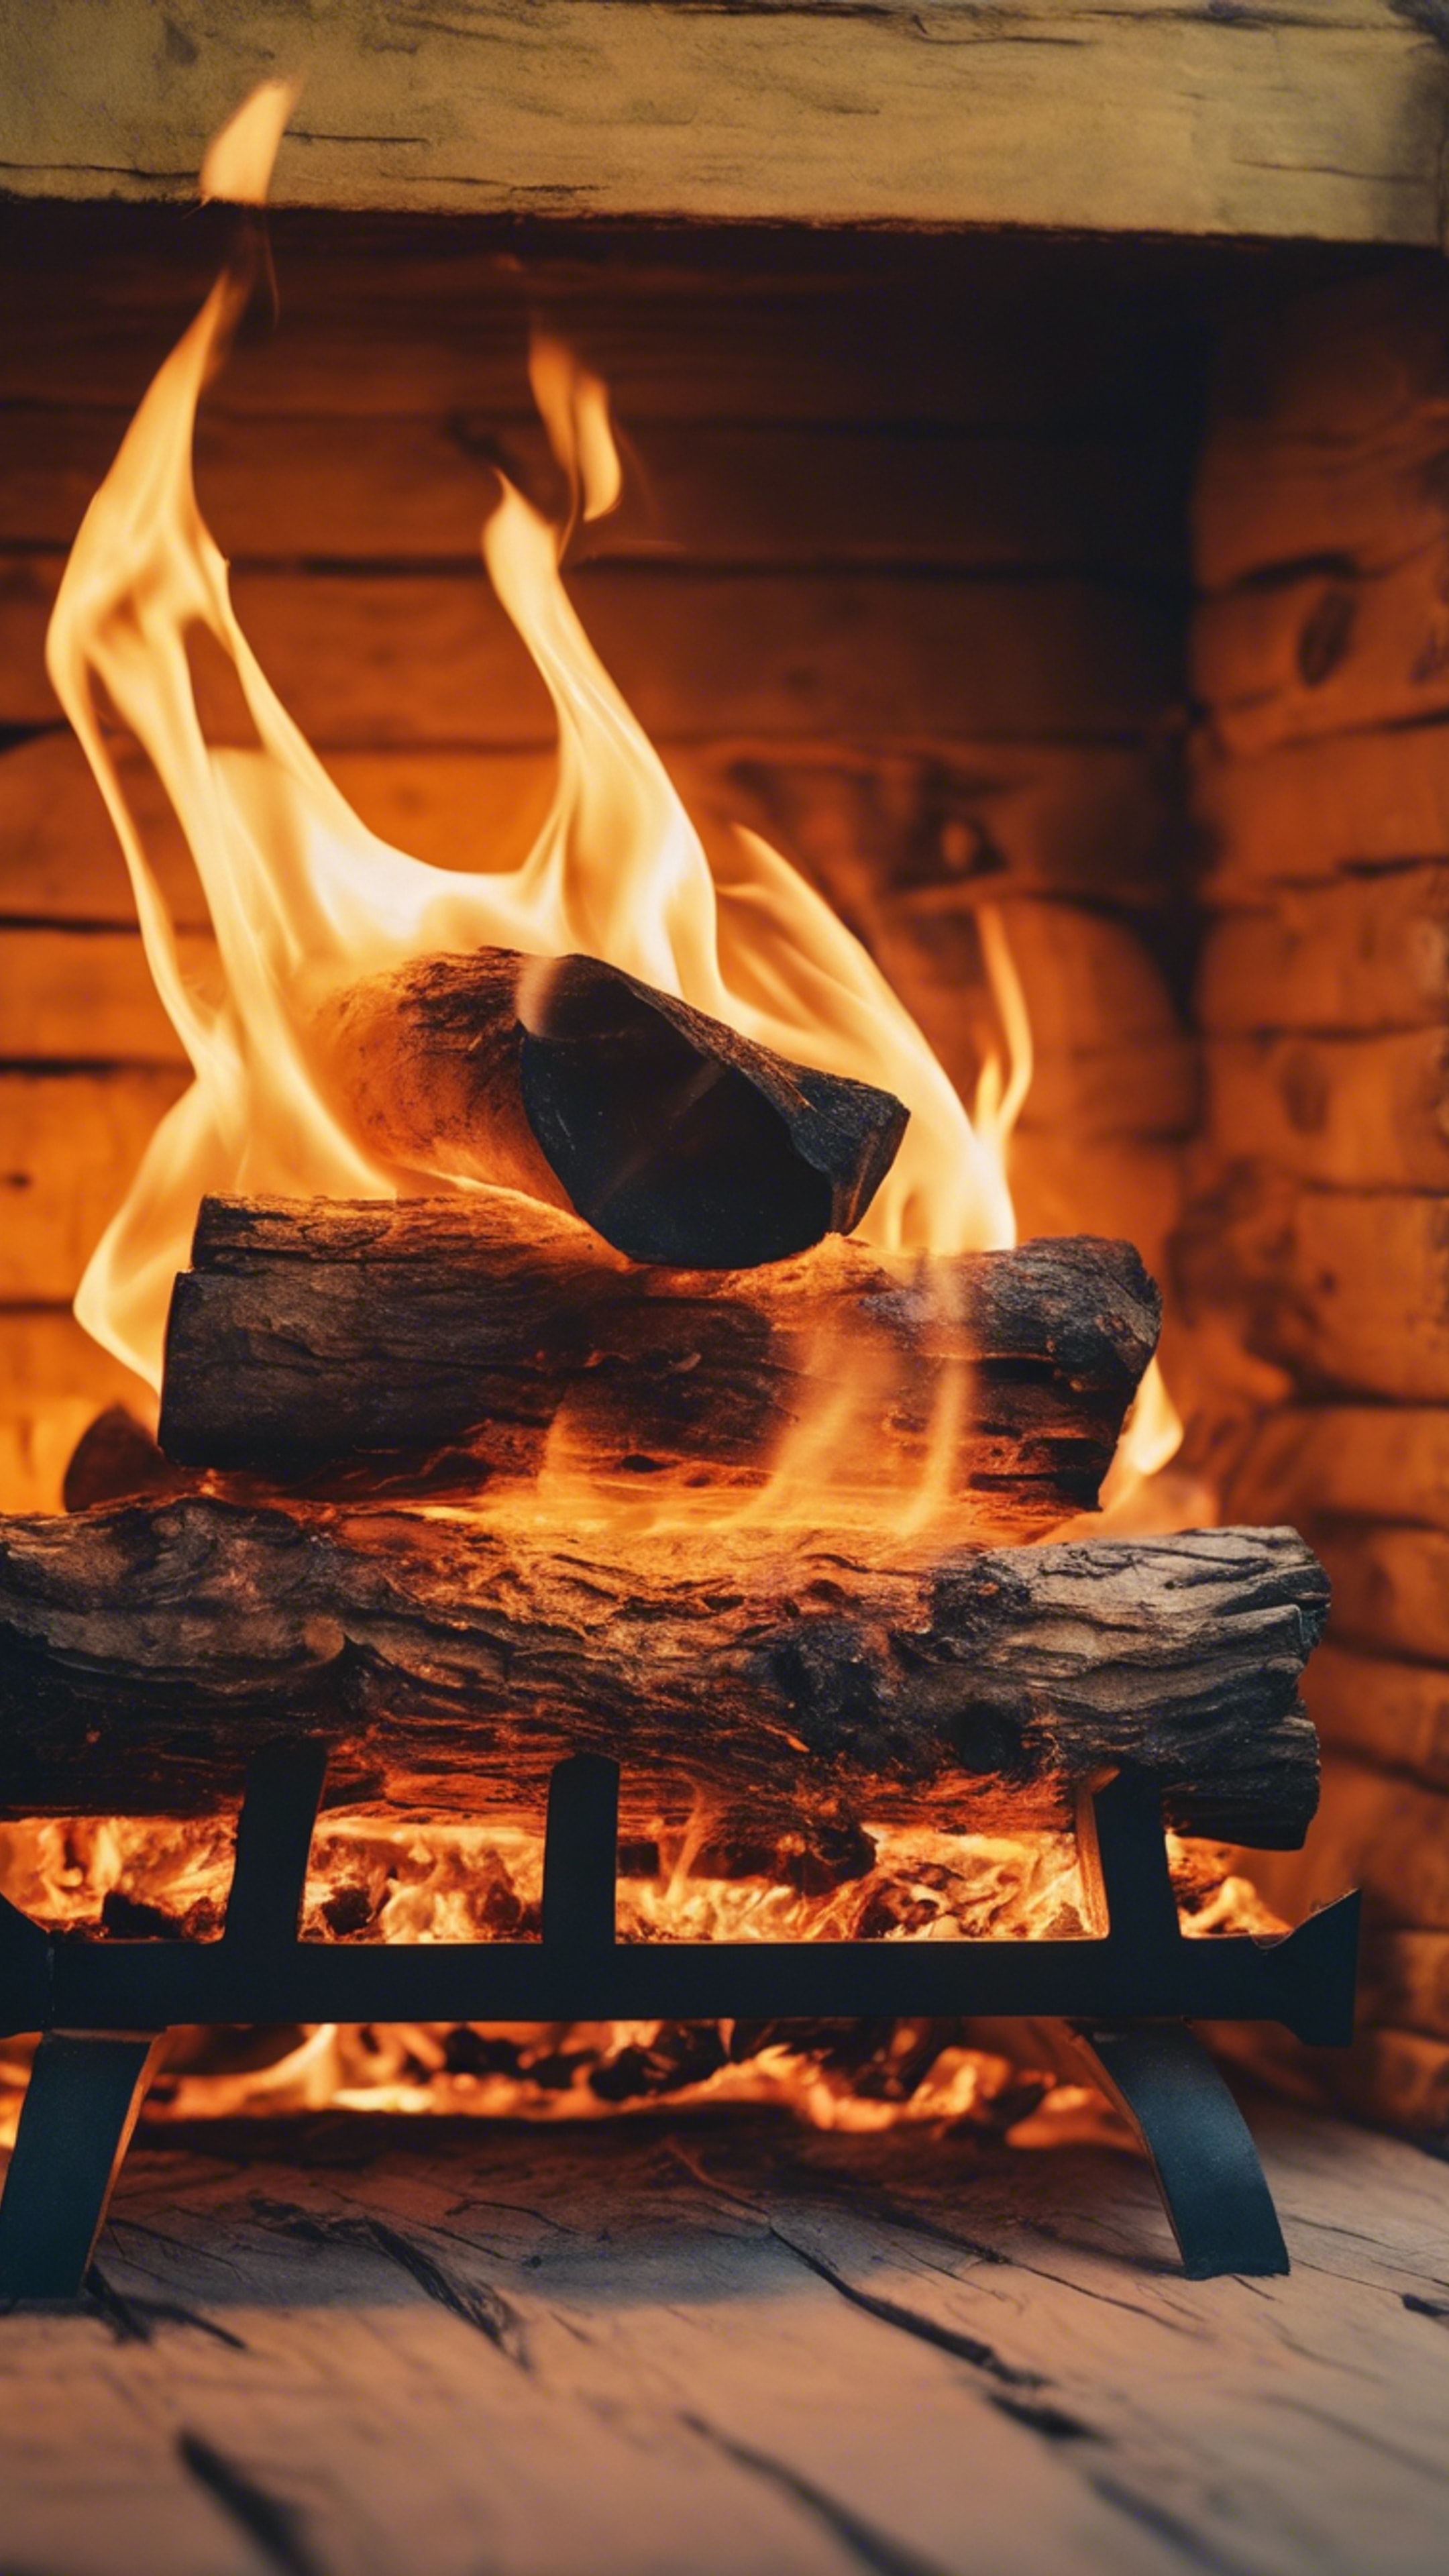 A fire crackling in wood fireplace with bright orange flames on a yellowish wooden background. Wallpaper[634561949a004dee8a58]